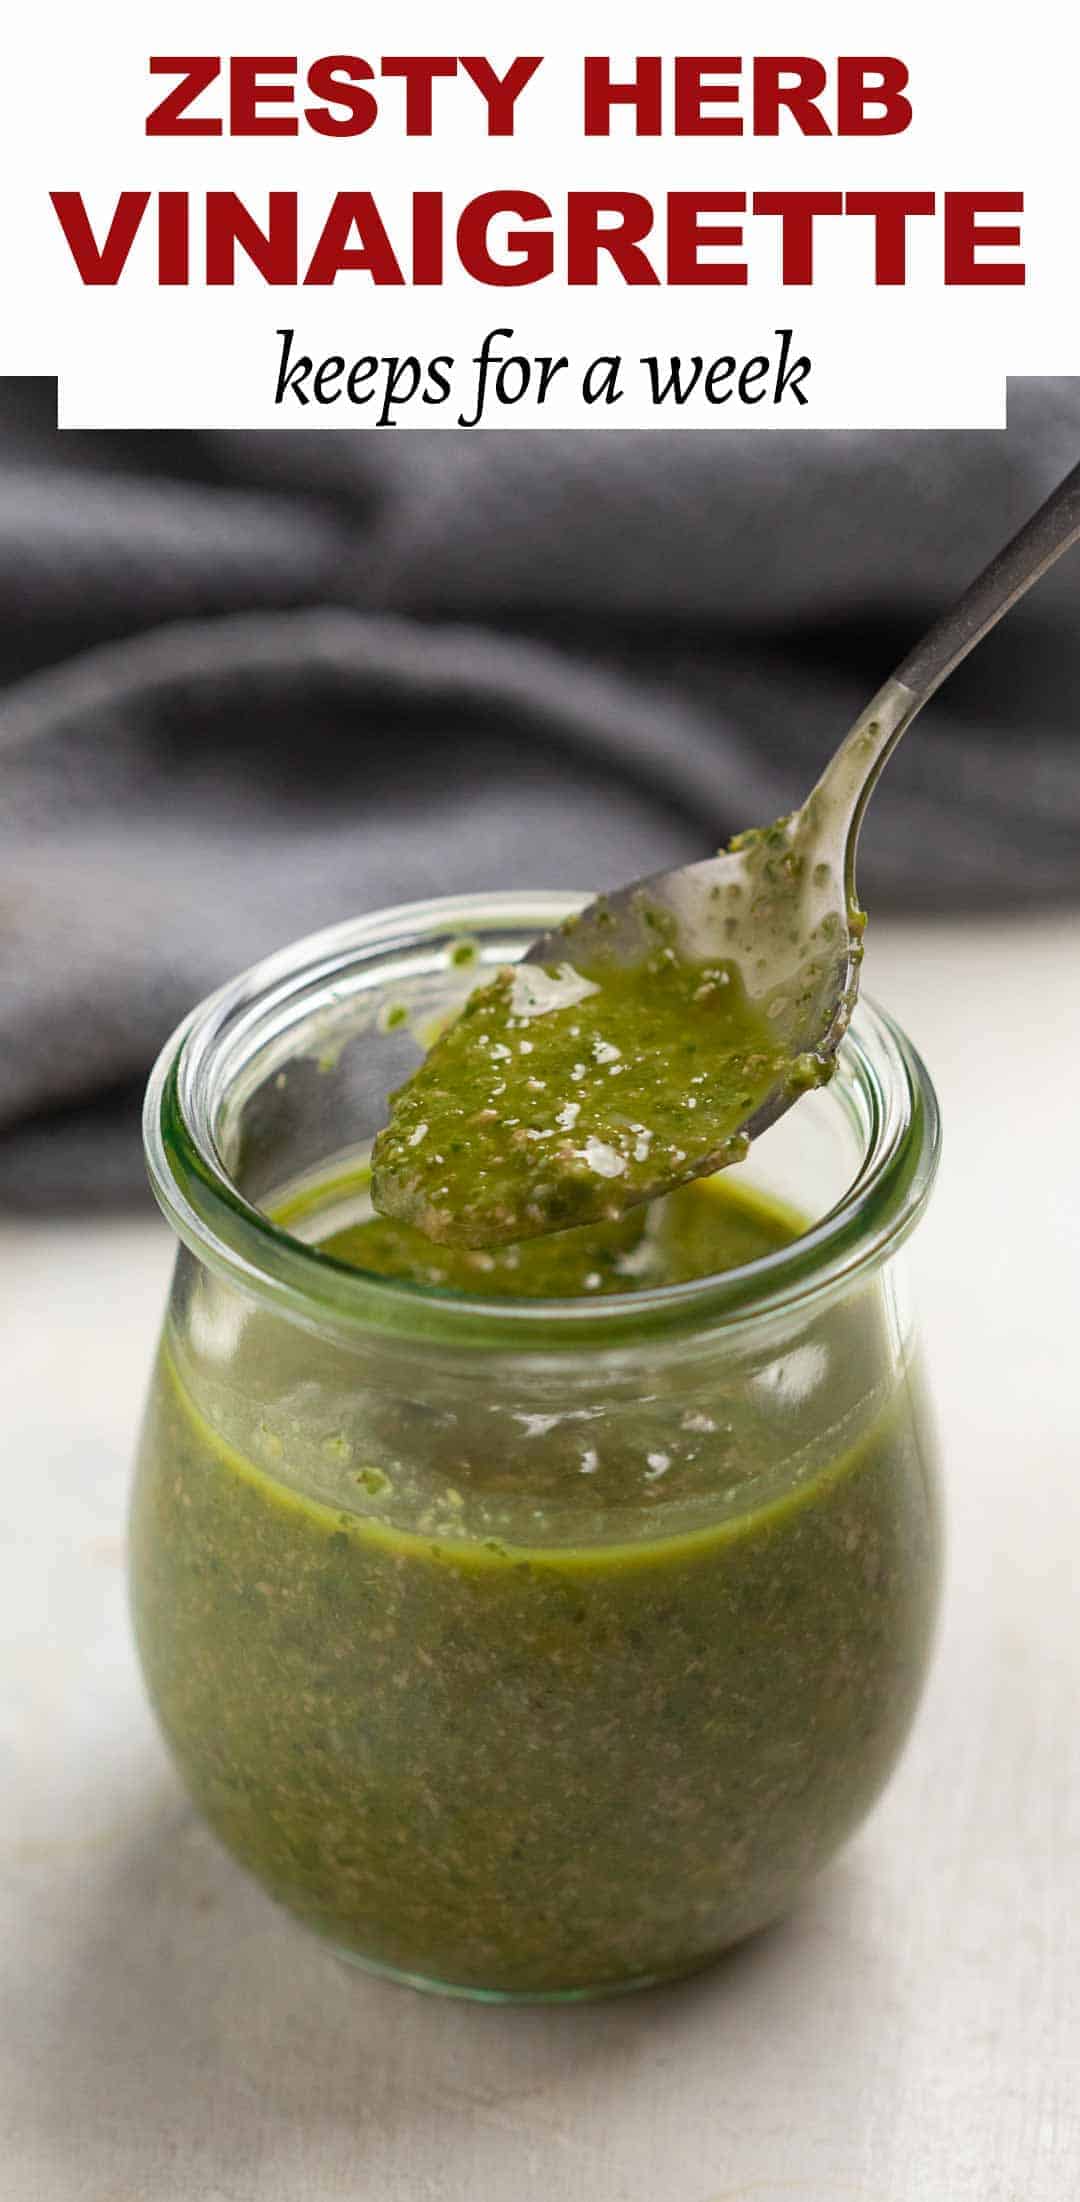 Herb vinaigrette in a jar with a spoon being taken out